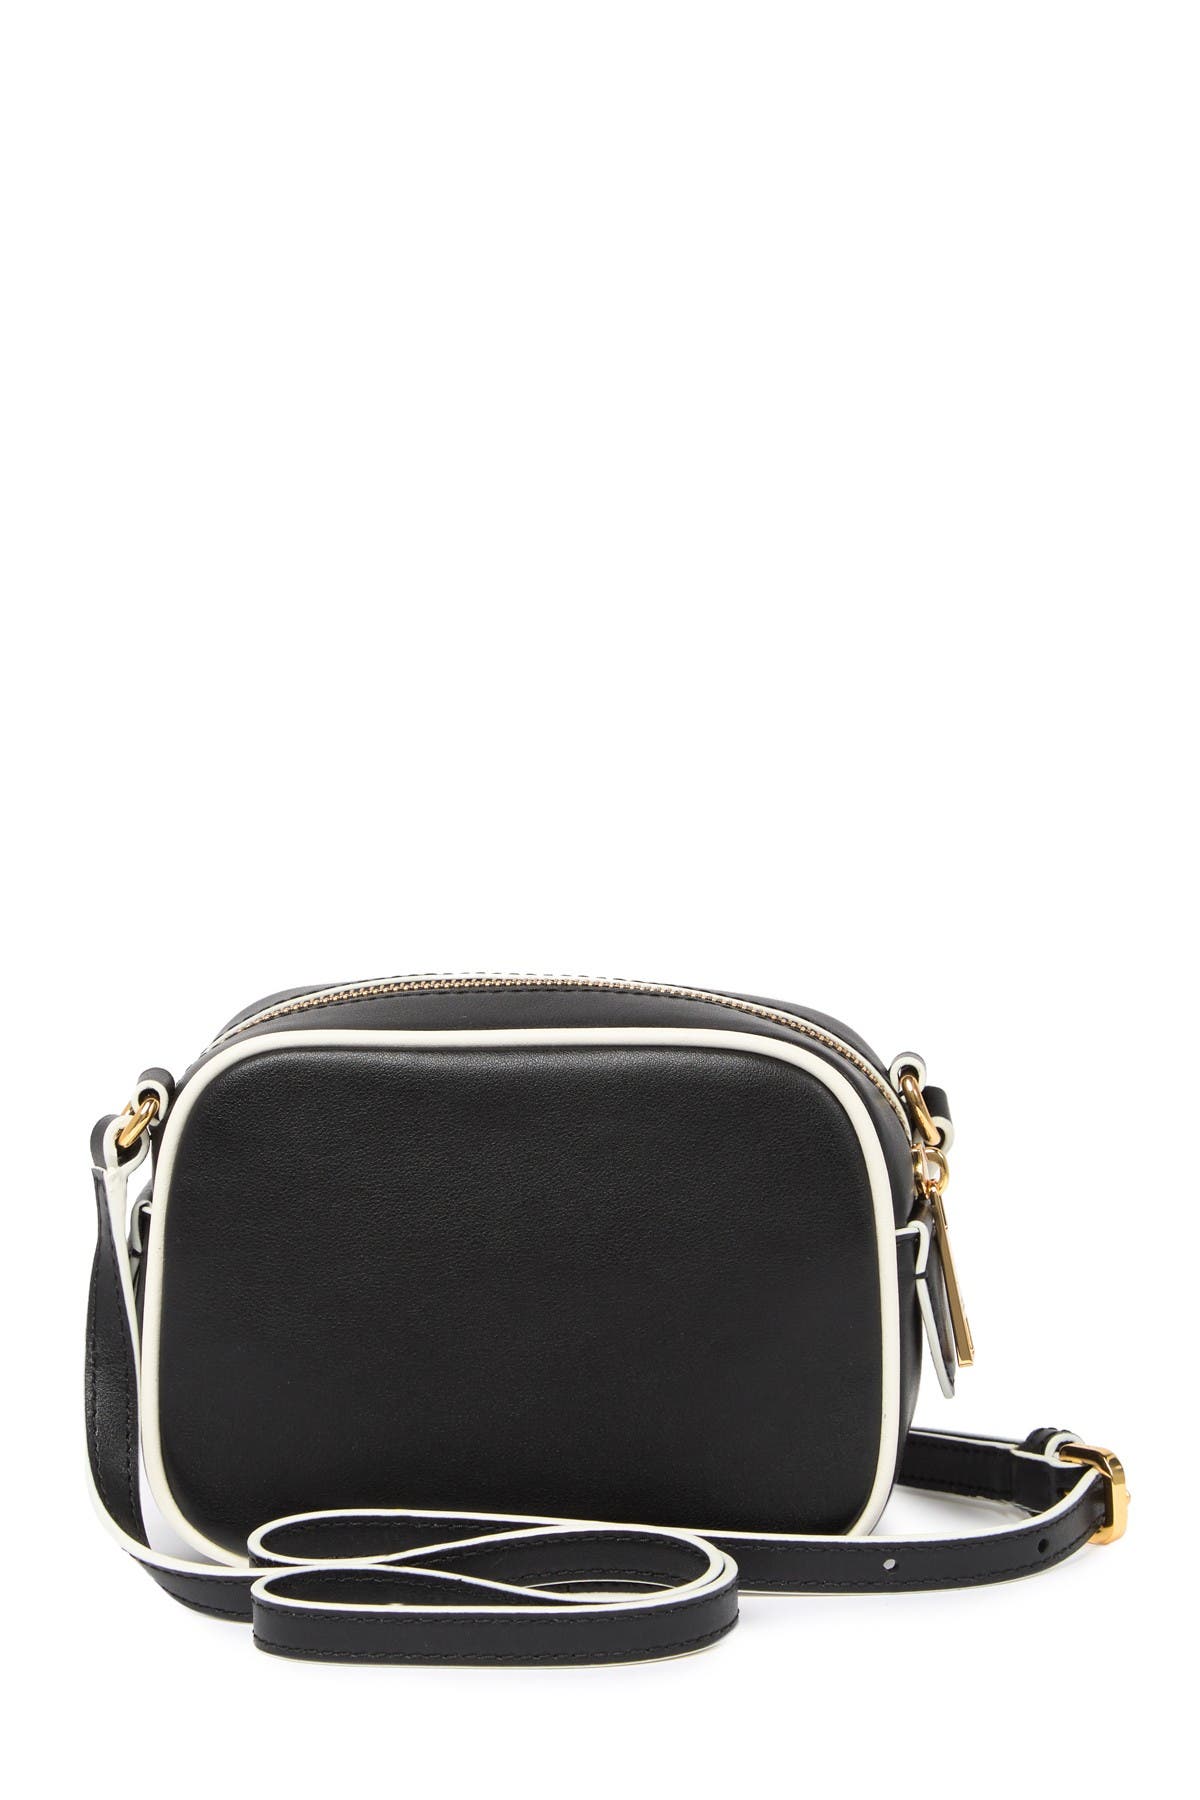 Marc Jacobs Voyager Square Crossbody Bag In Black